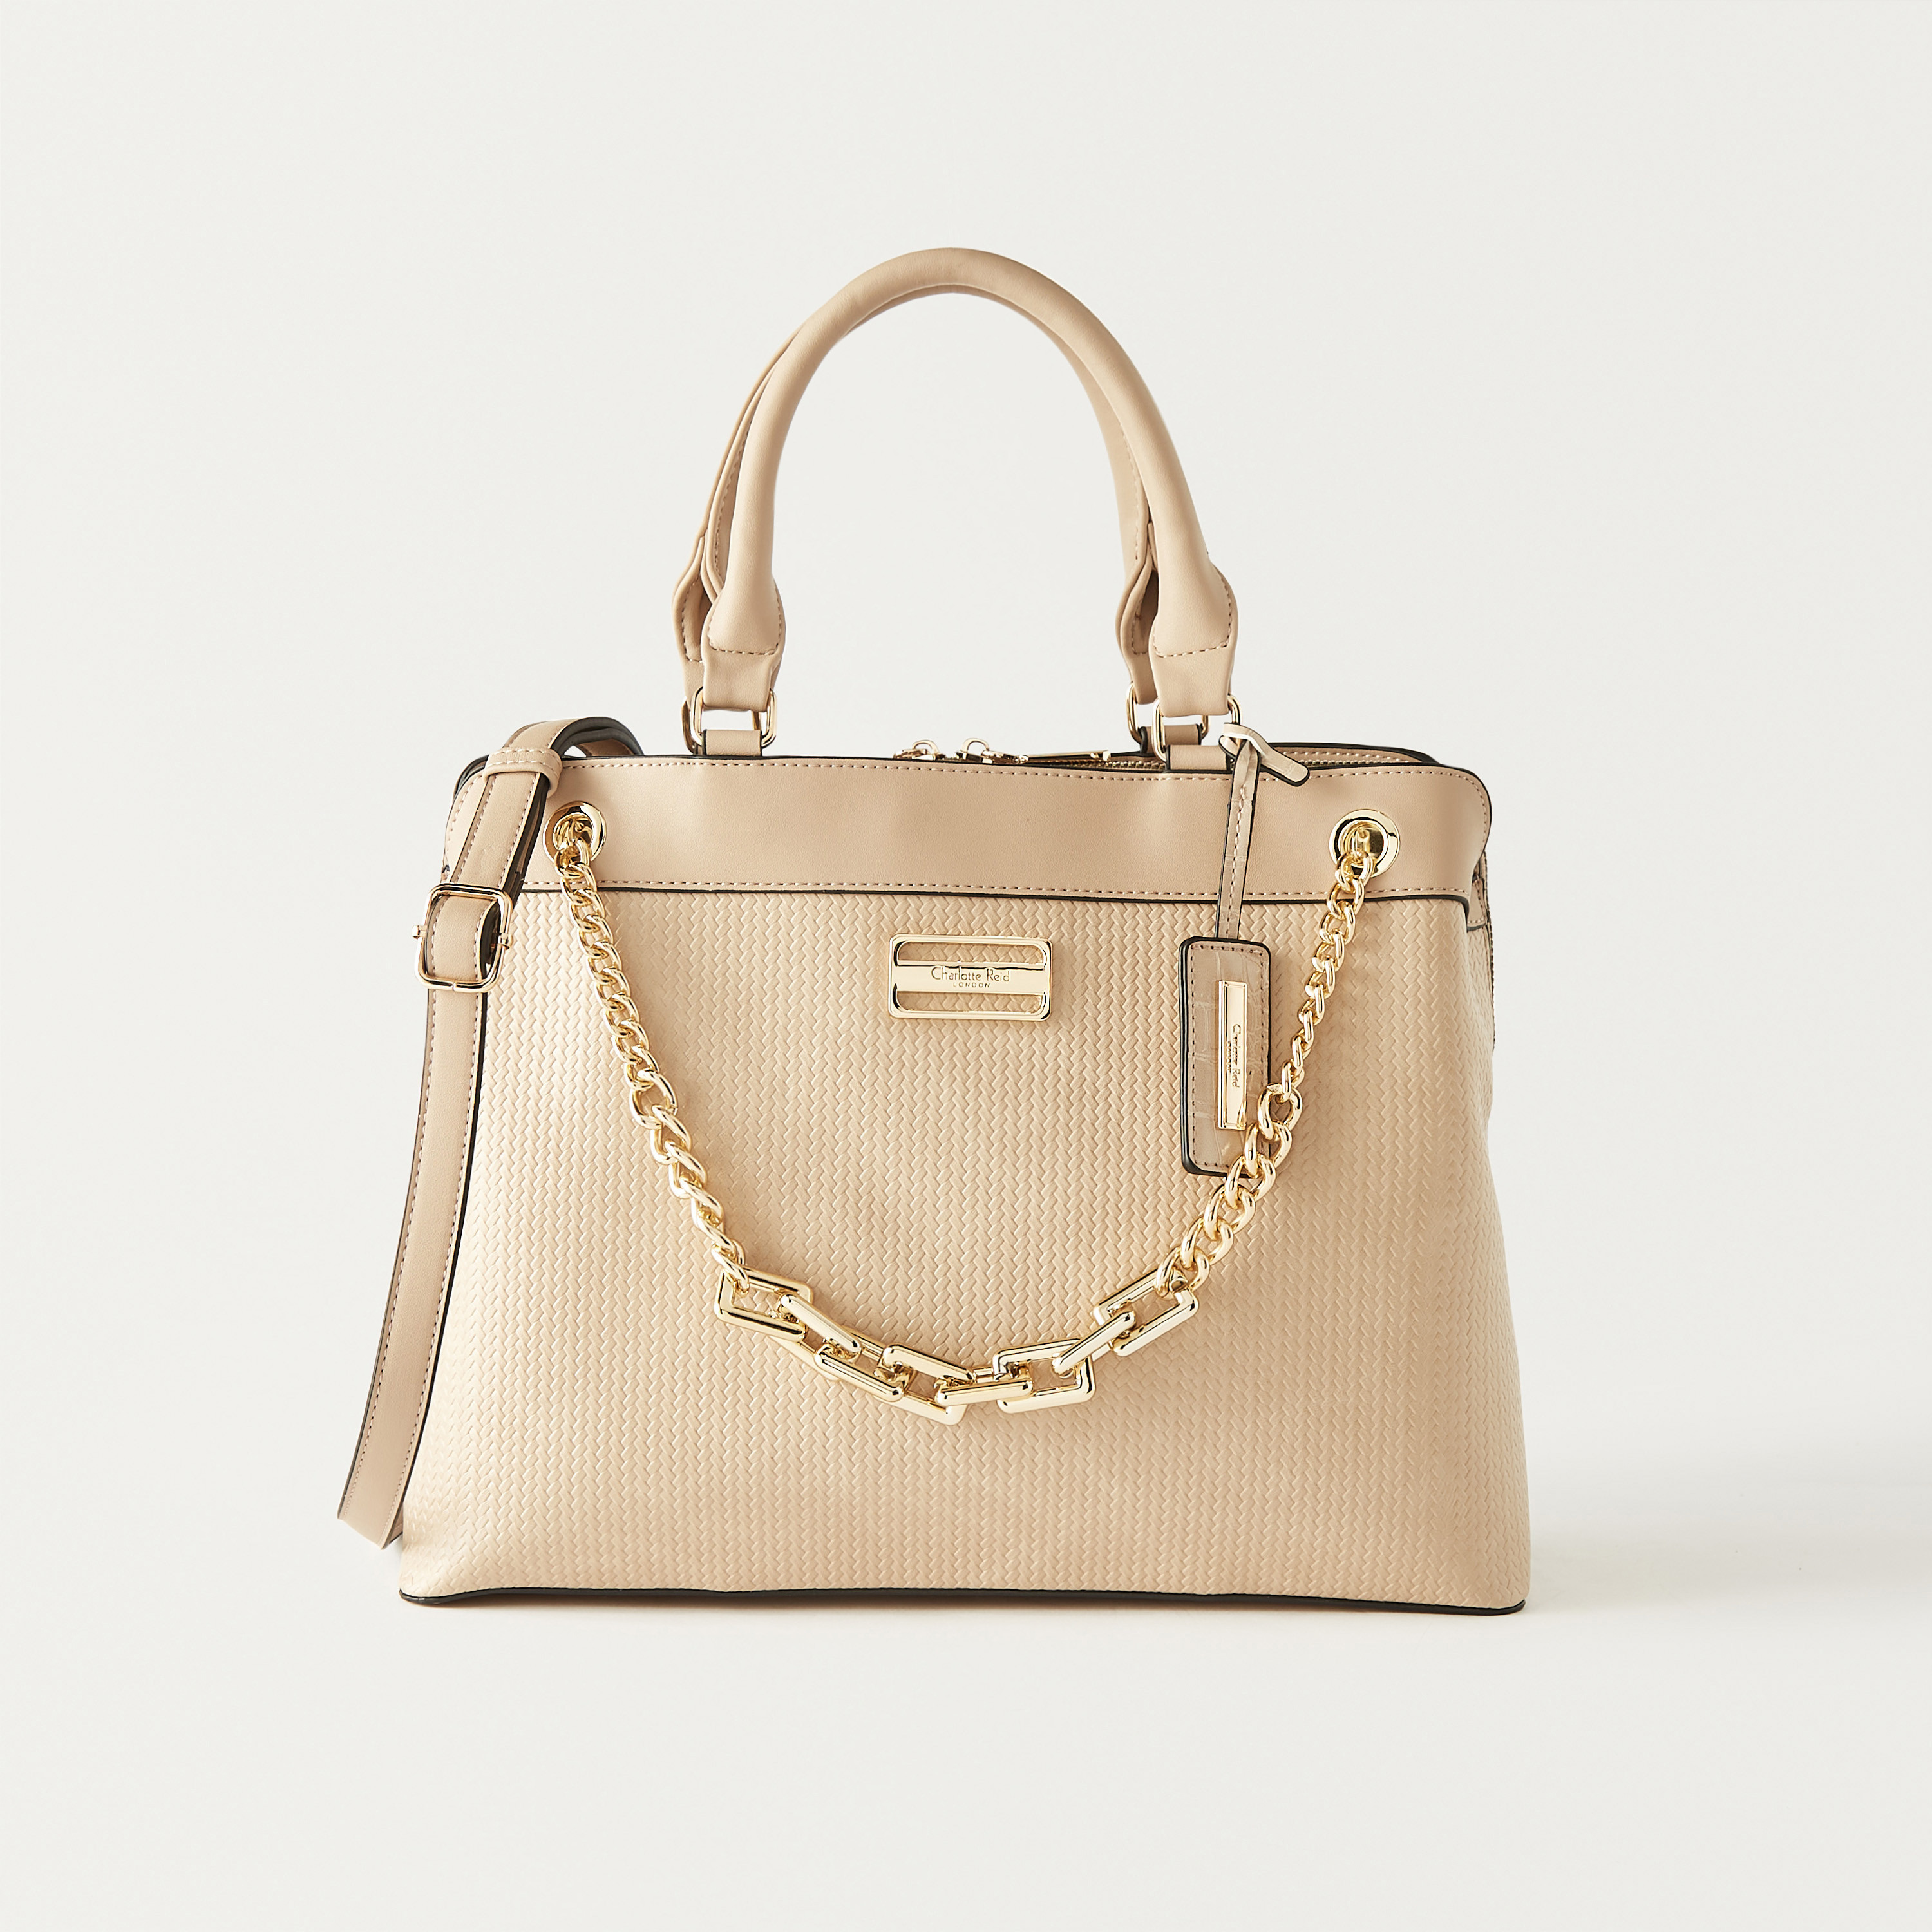 Buy Women's Charlotte Reid Laser Cut Tote Bag with Double Handles Online |  Centrepoint UAE